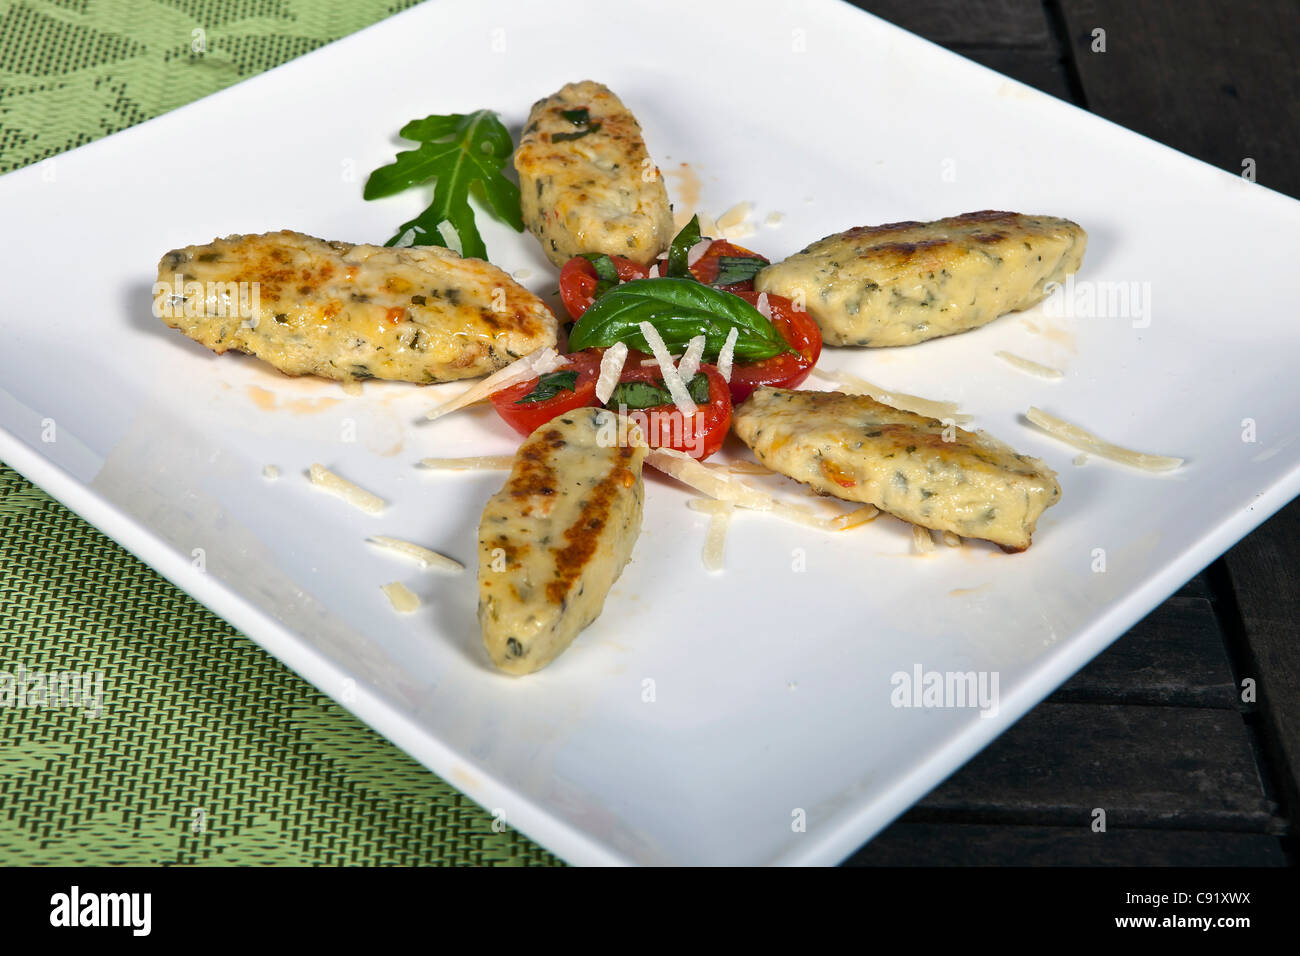 Quark rocket and fried dumplings served with tomatoes Stock Photo